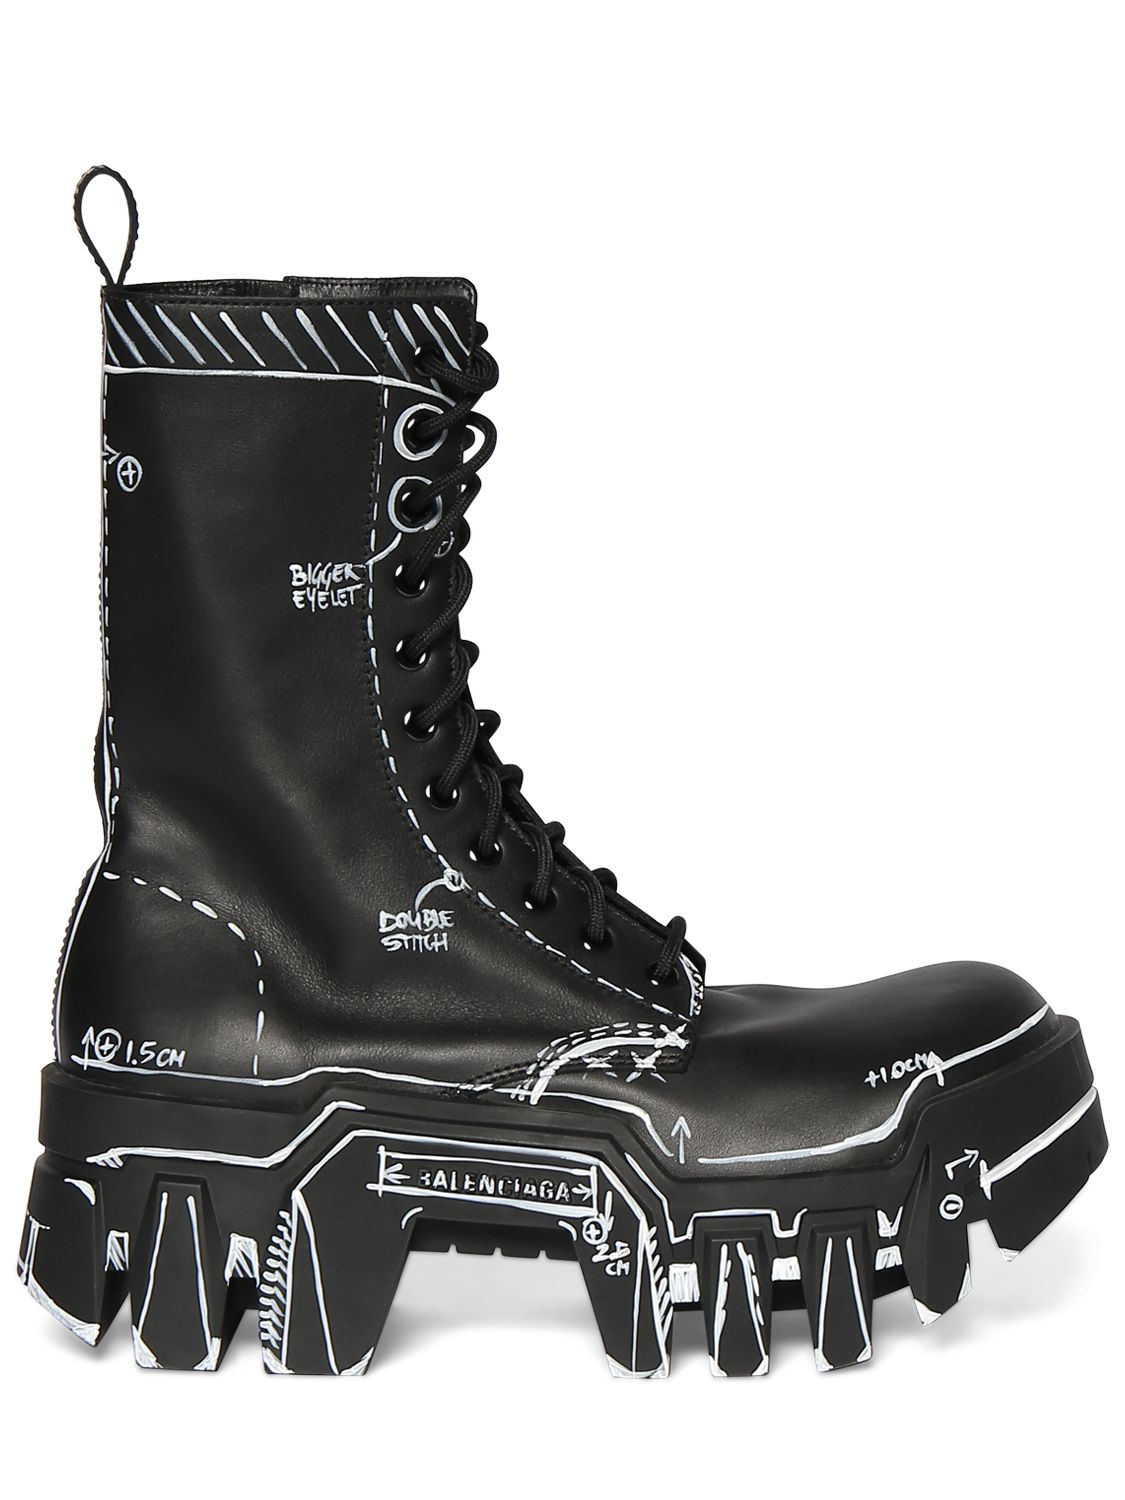 Bulldozer Lace-up Boots